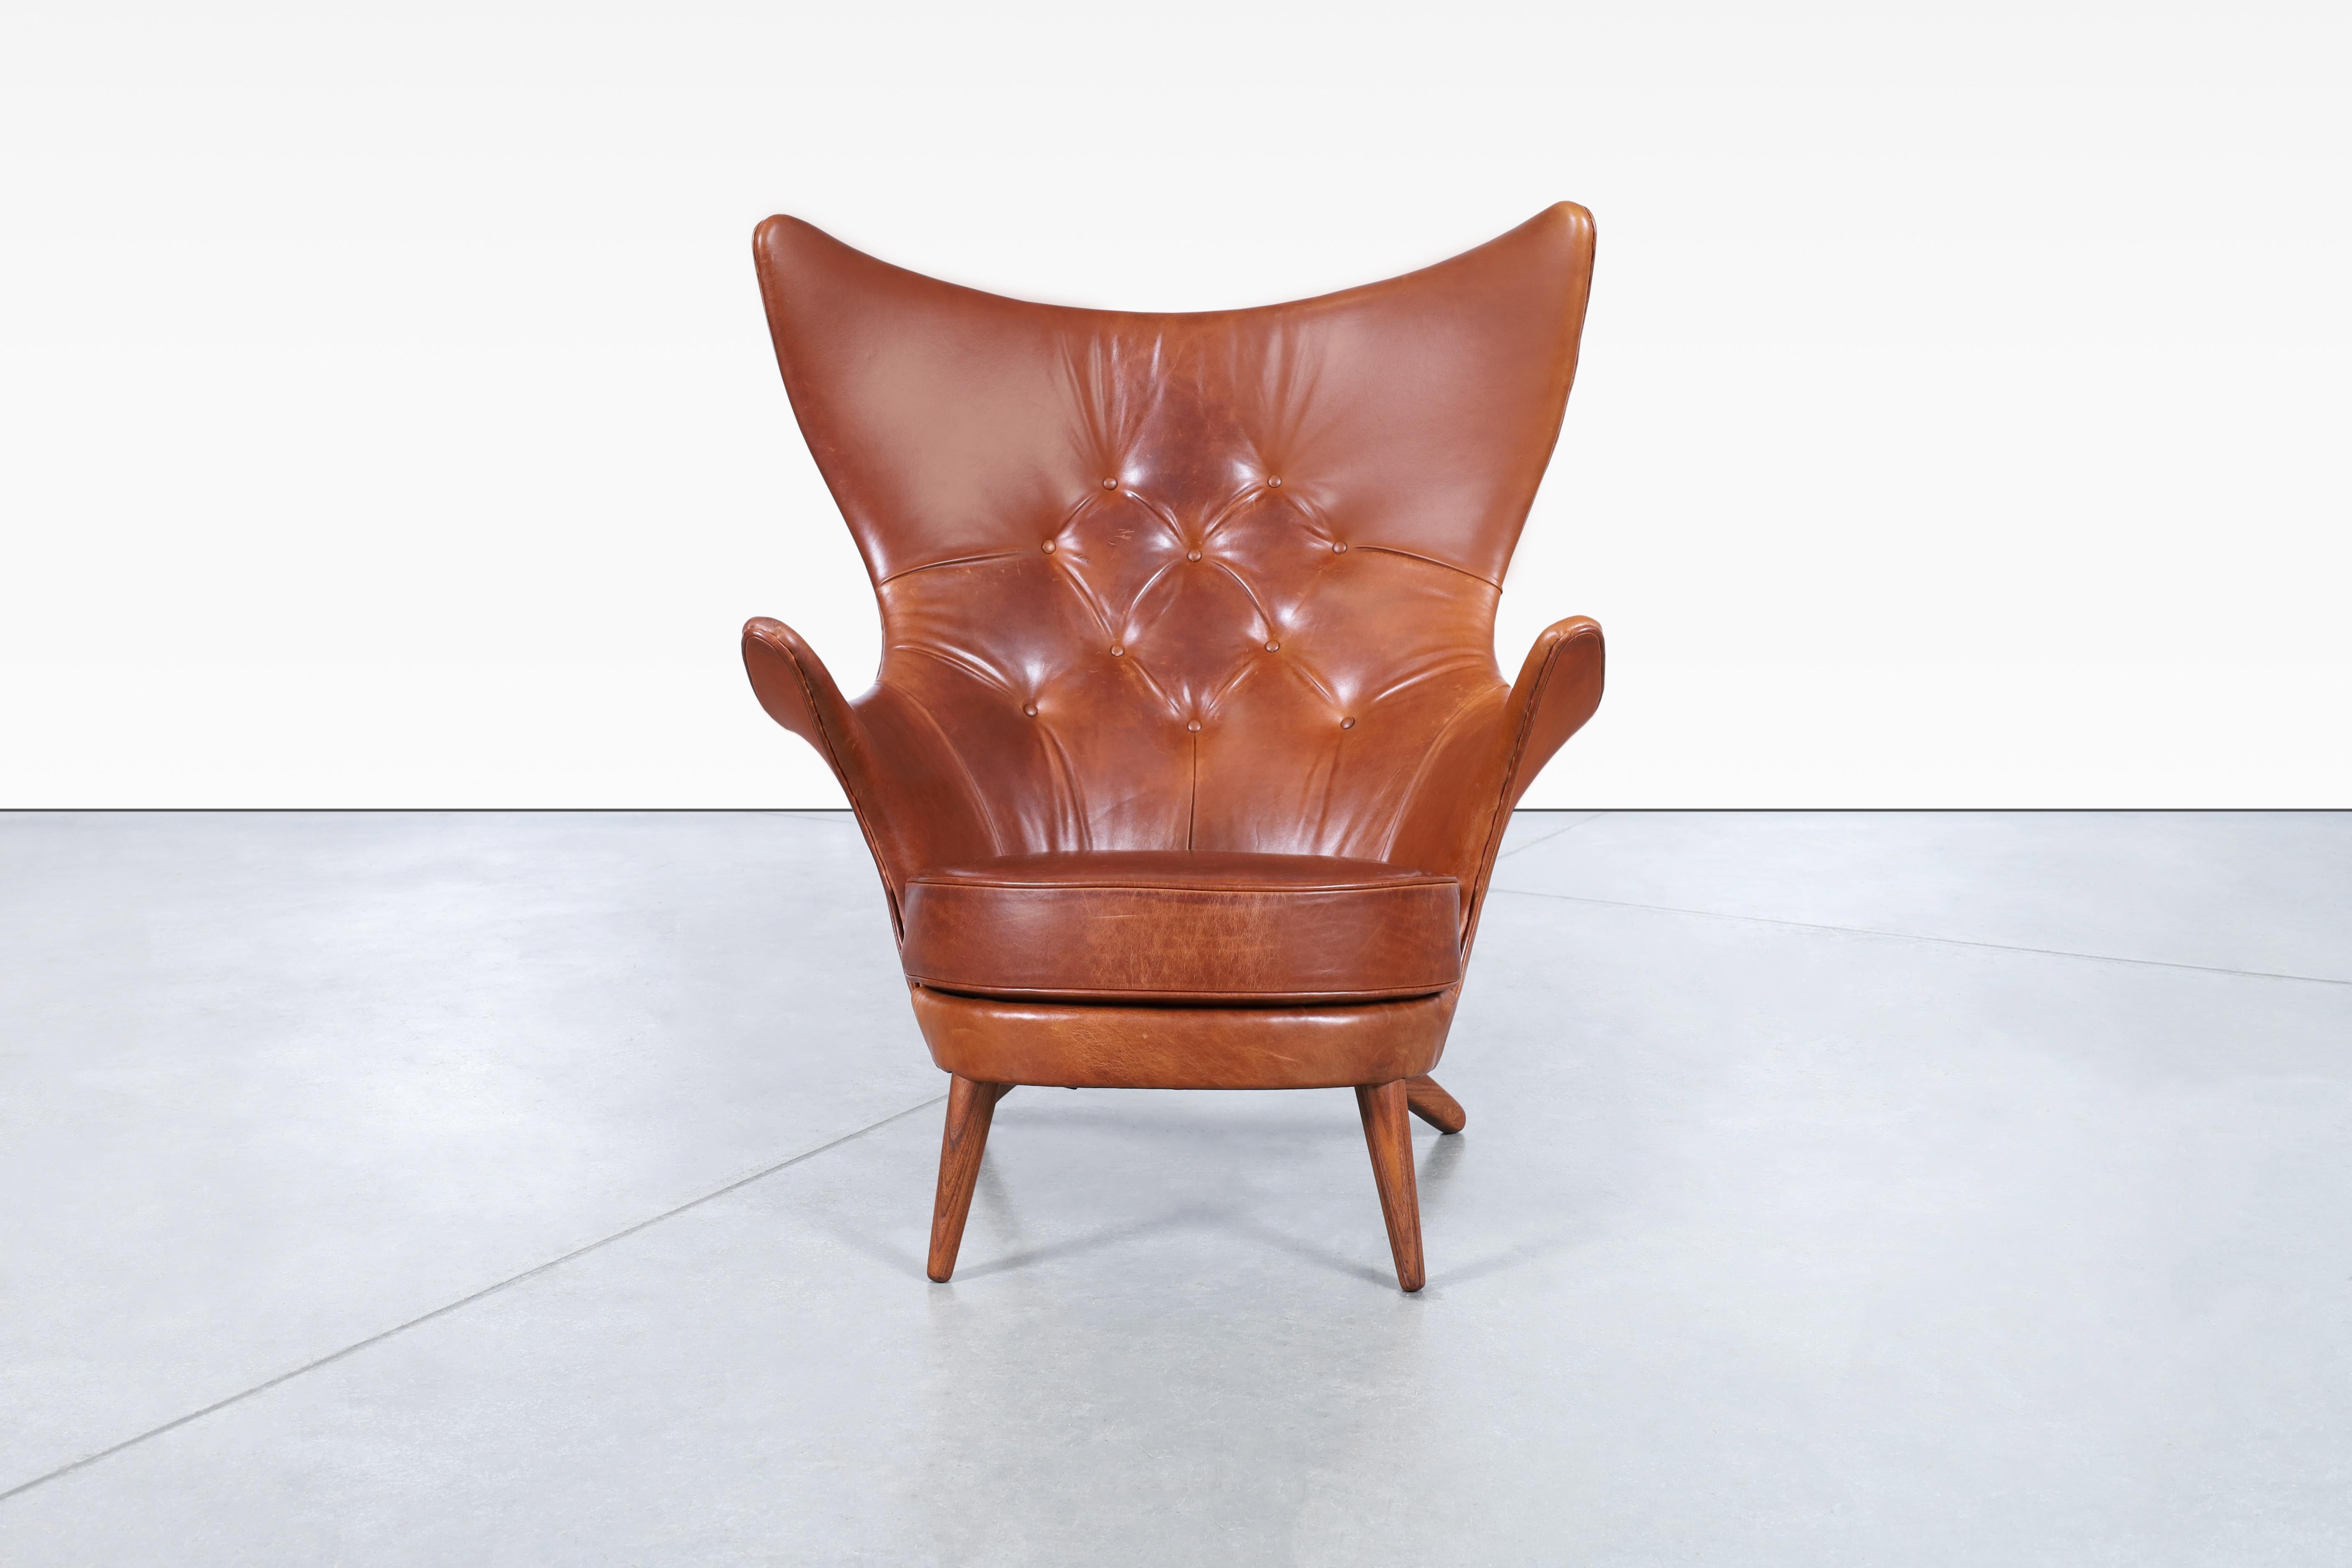 Amazing vintage leather wingback lounge chair designed by Kai Bruun for Sesam Møbler in Denmark, circa 1960s. This chair, also known as Siesta, is a true testament to the art of furniture making, featuring the finest high-quality Italian leather and